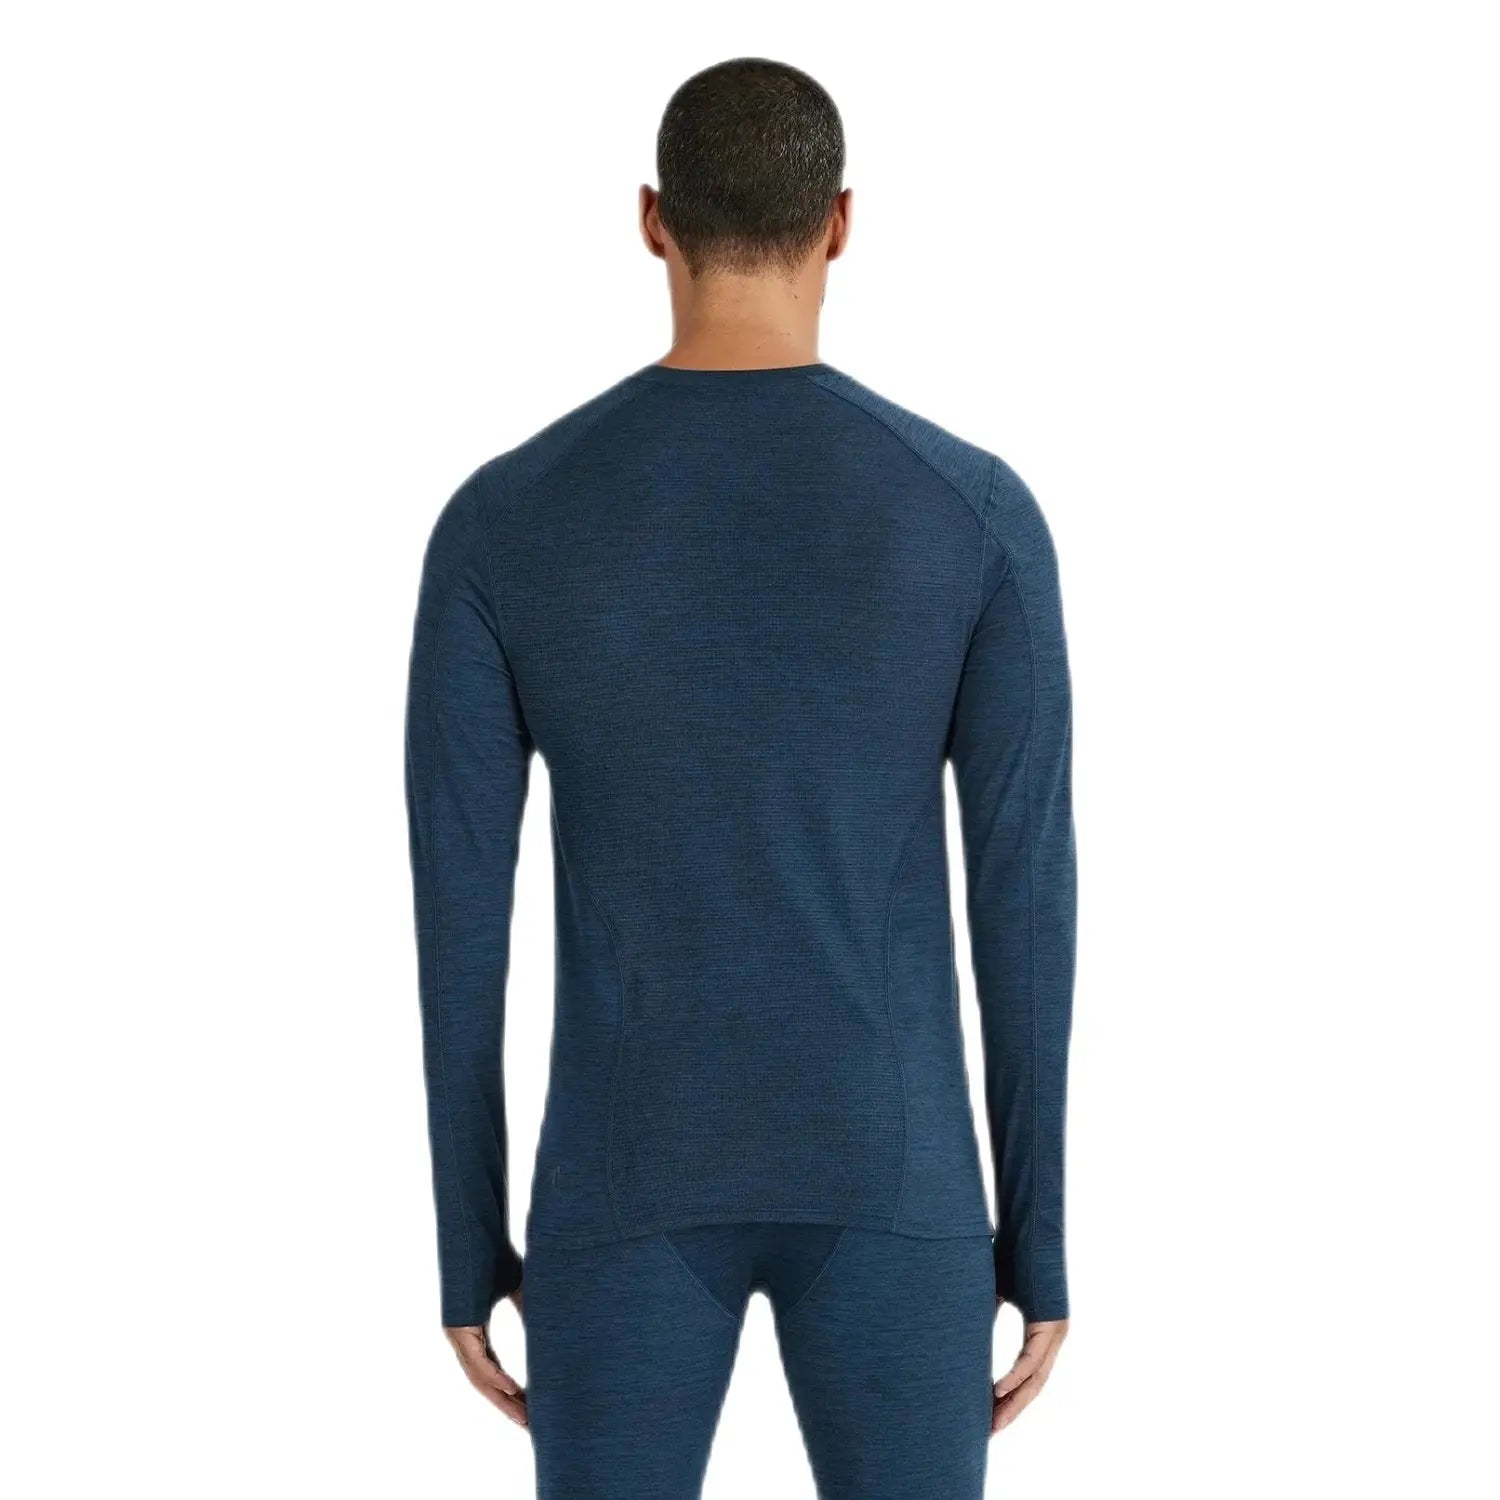 Terramar M's Thermolator Midweight Performance Baselayer Crew Top, Nighshadow, back view on model